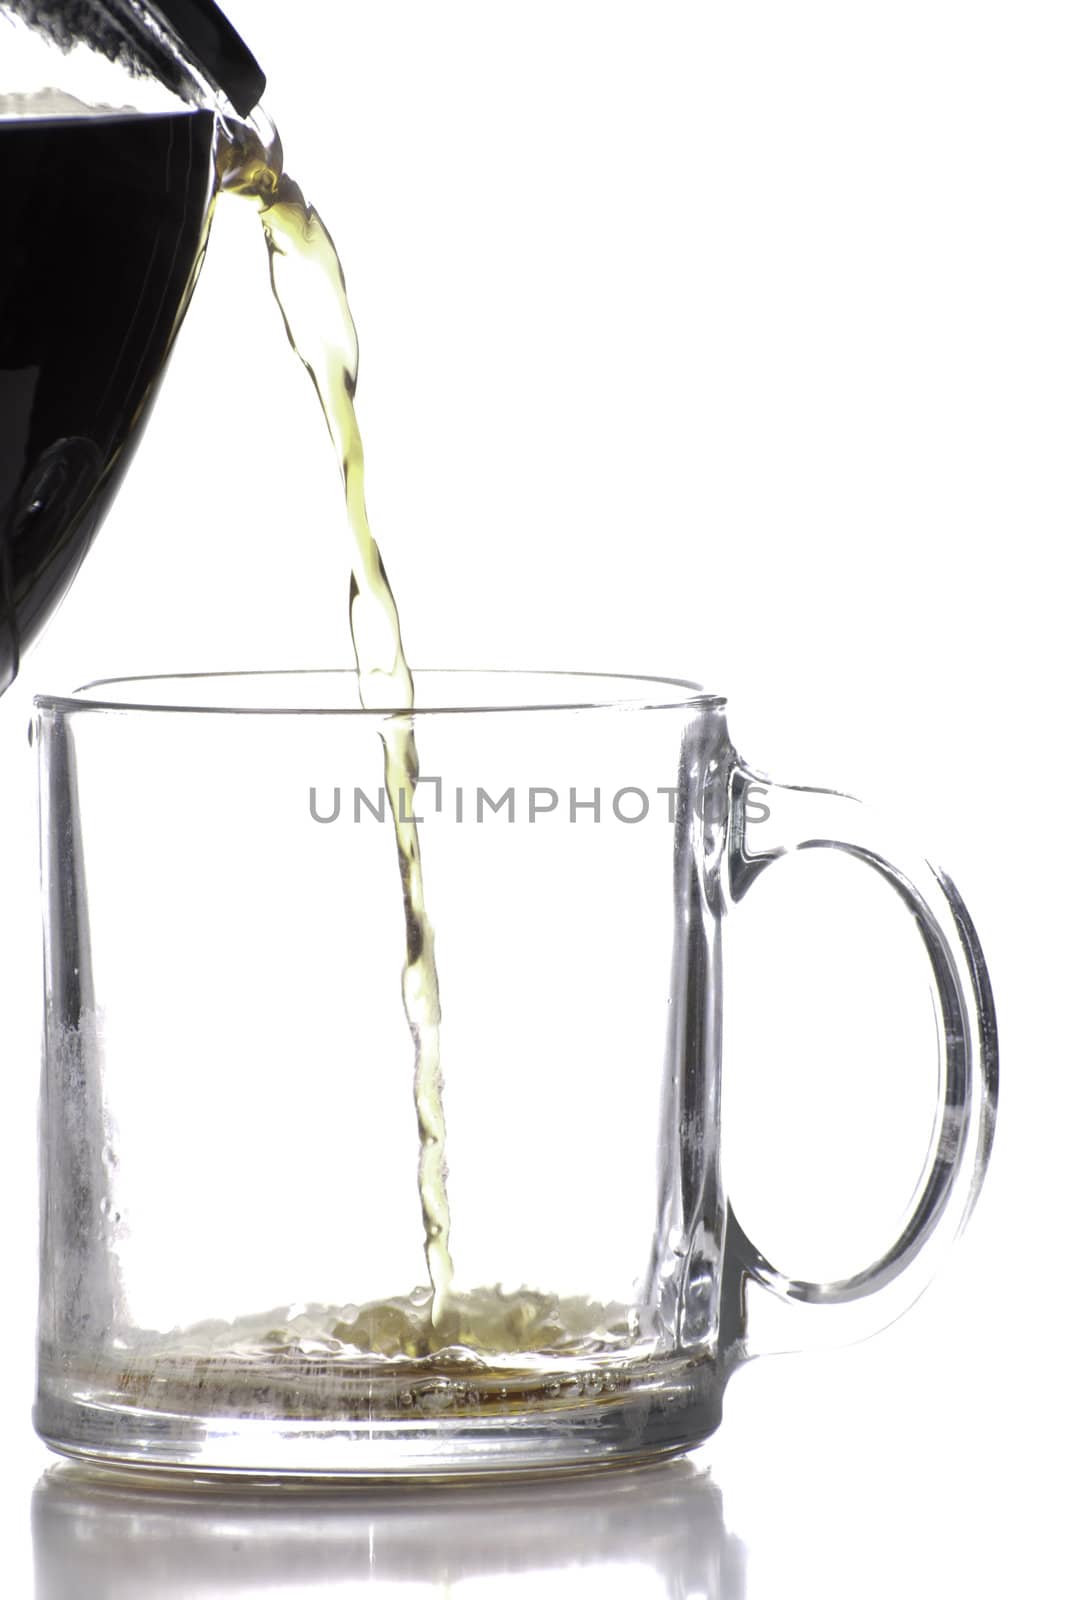 Coffee being poured into a clear coffee cup, shot against a white background